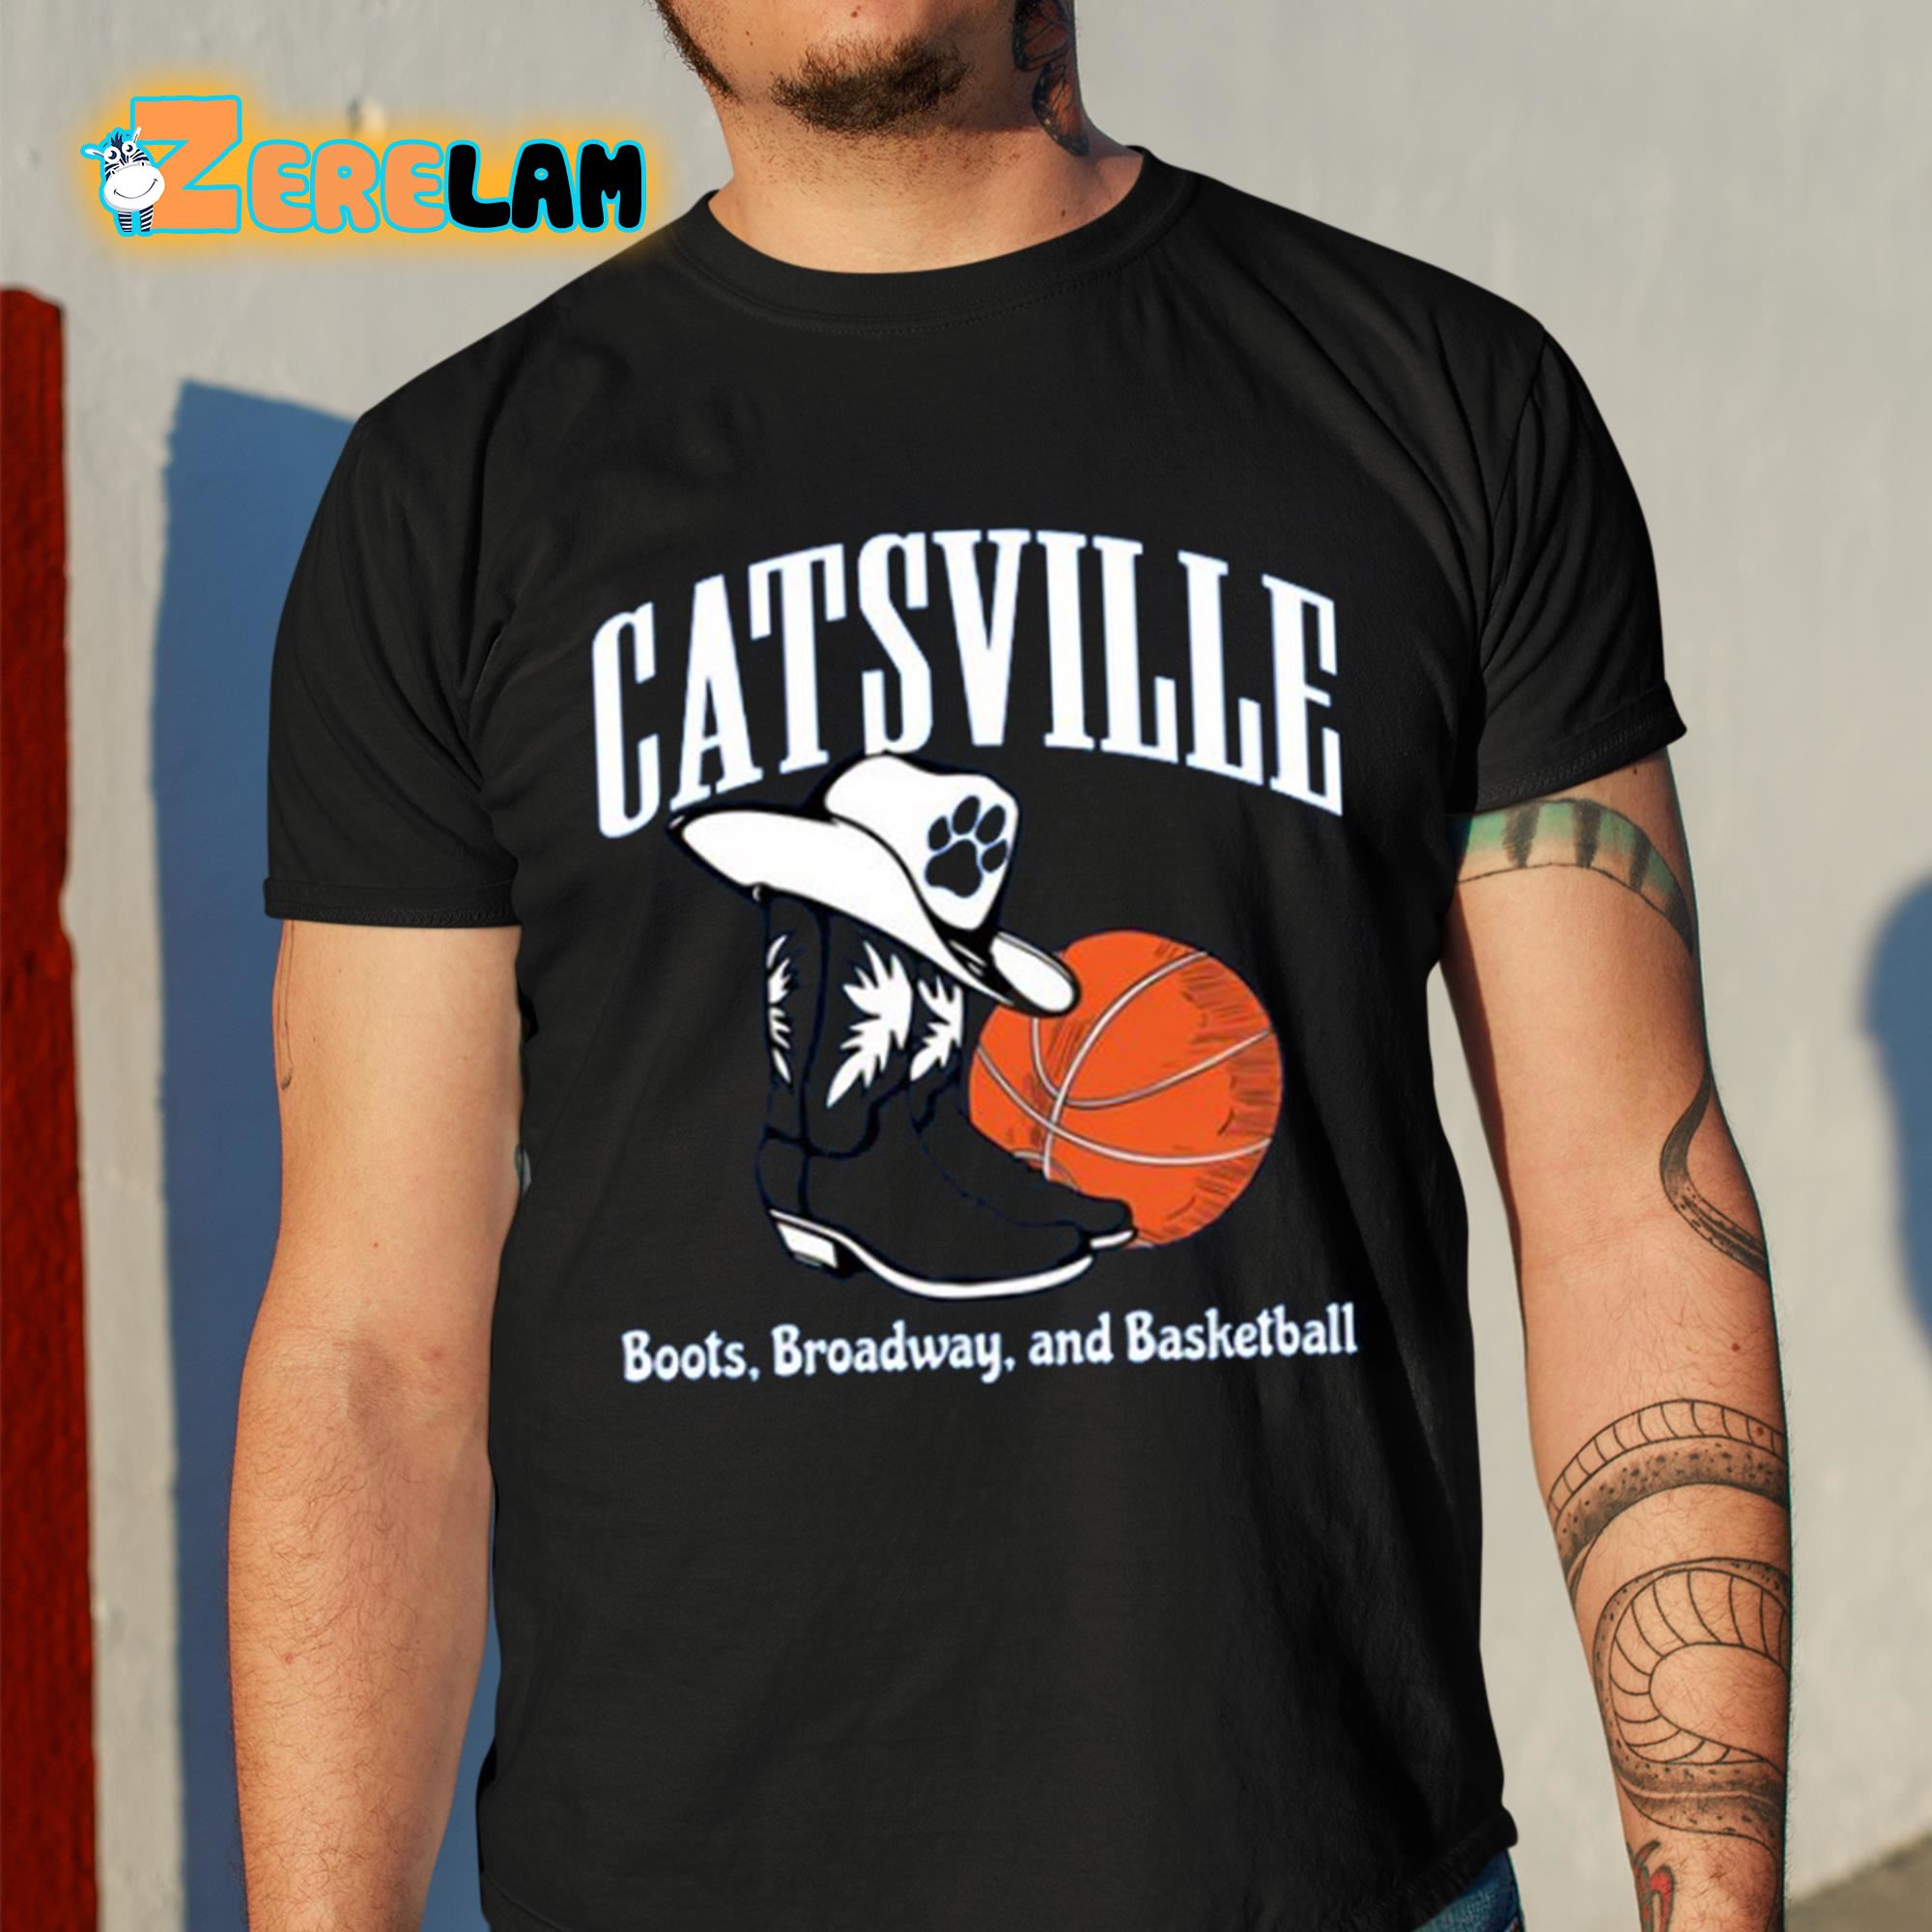 Catsville The Boots On Broadway And Basketball Shirt - Zerelam